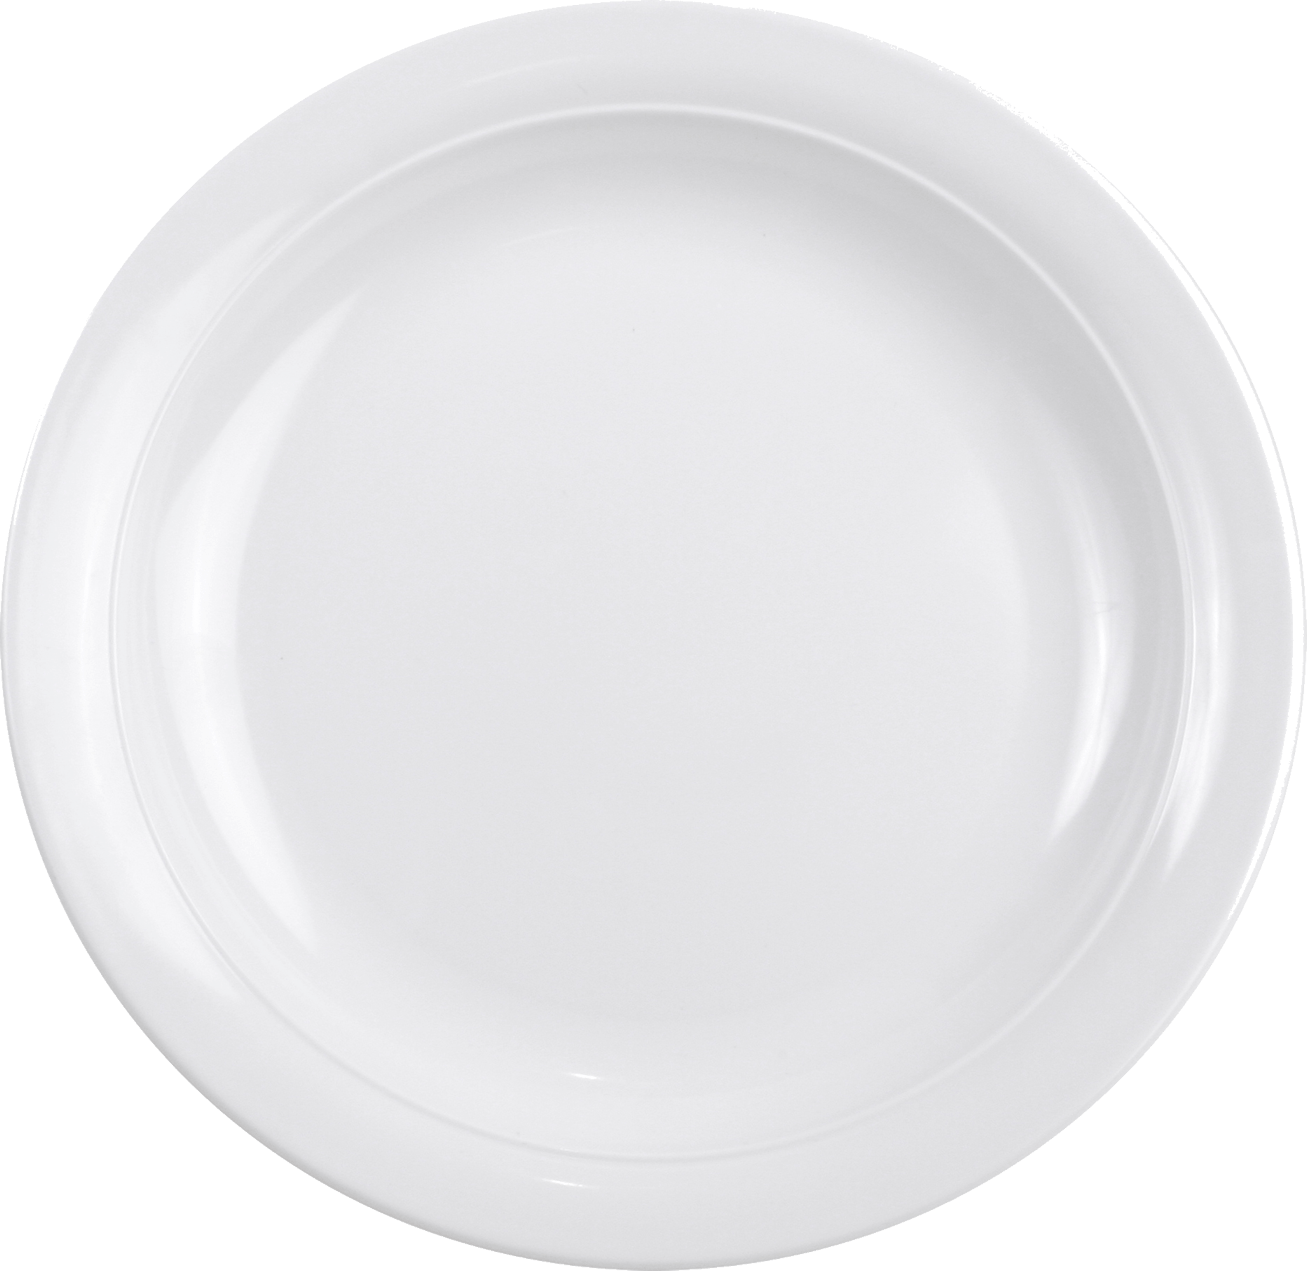 White Plate PNG Image